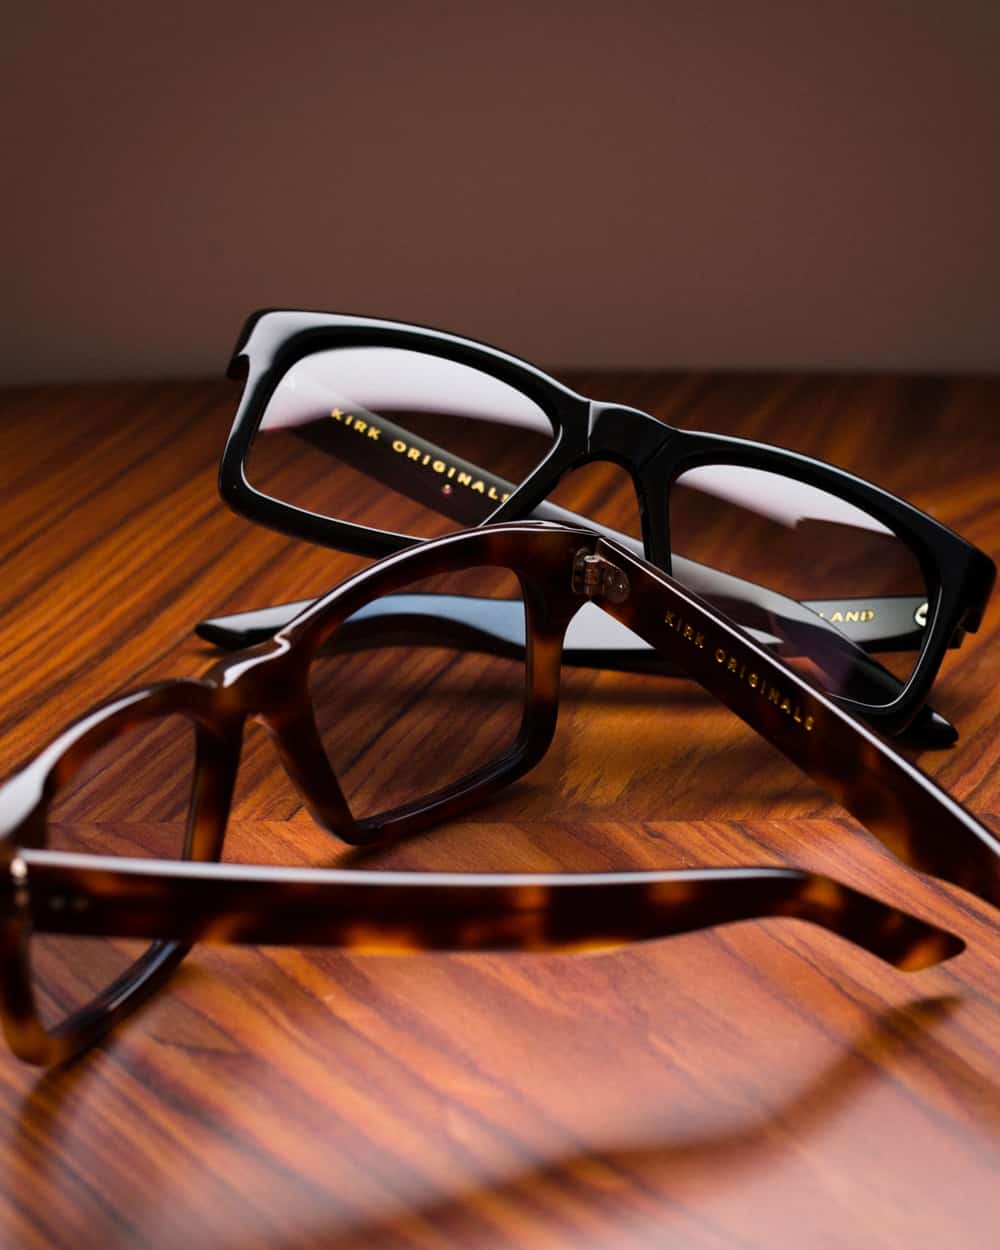 Two pairs of Kirk Originals spectacles in tortoiseshell and black acetate frames